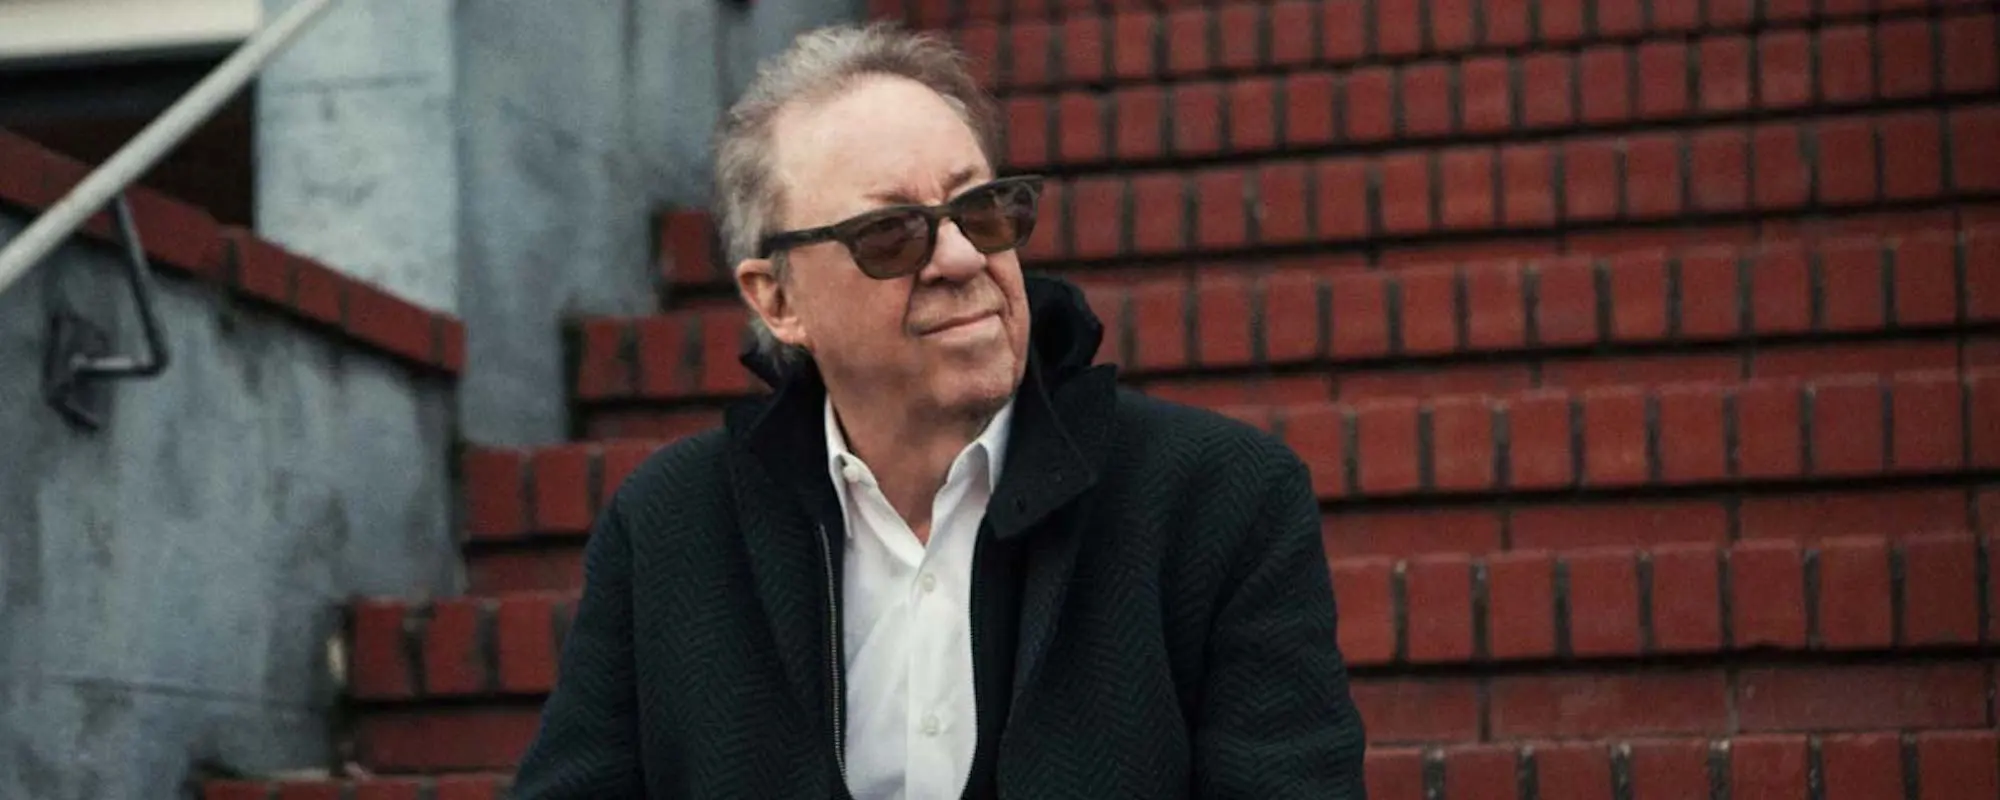 Meaning Behind the Fats Domino-Inspired “Lido Shuffle” by Boz Scaggs